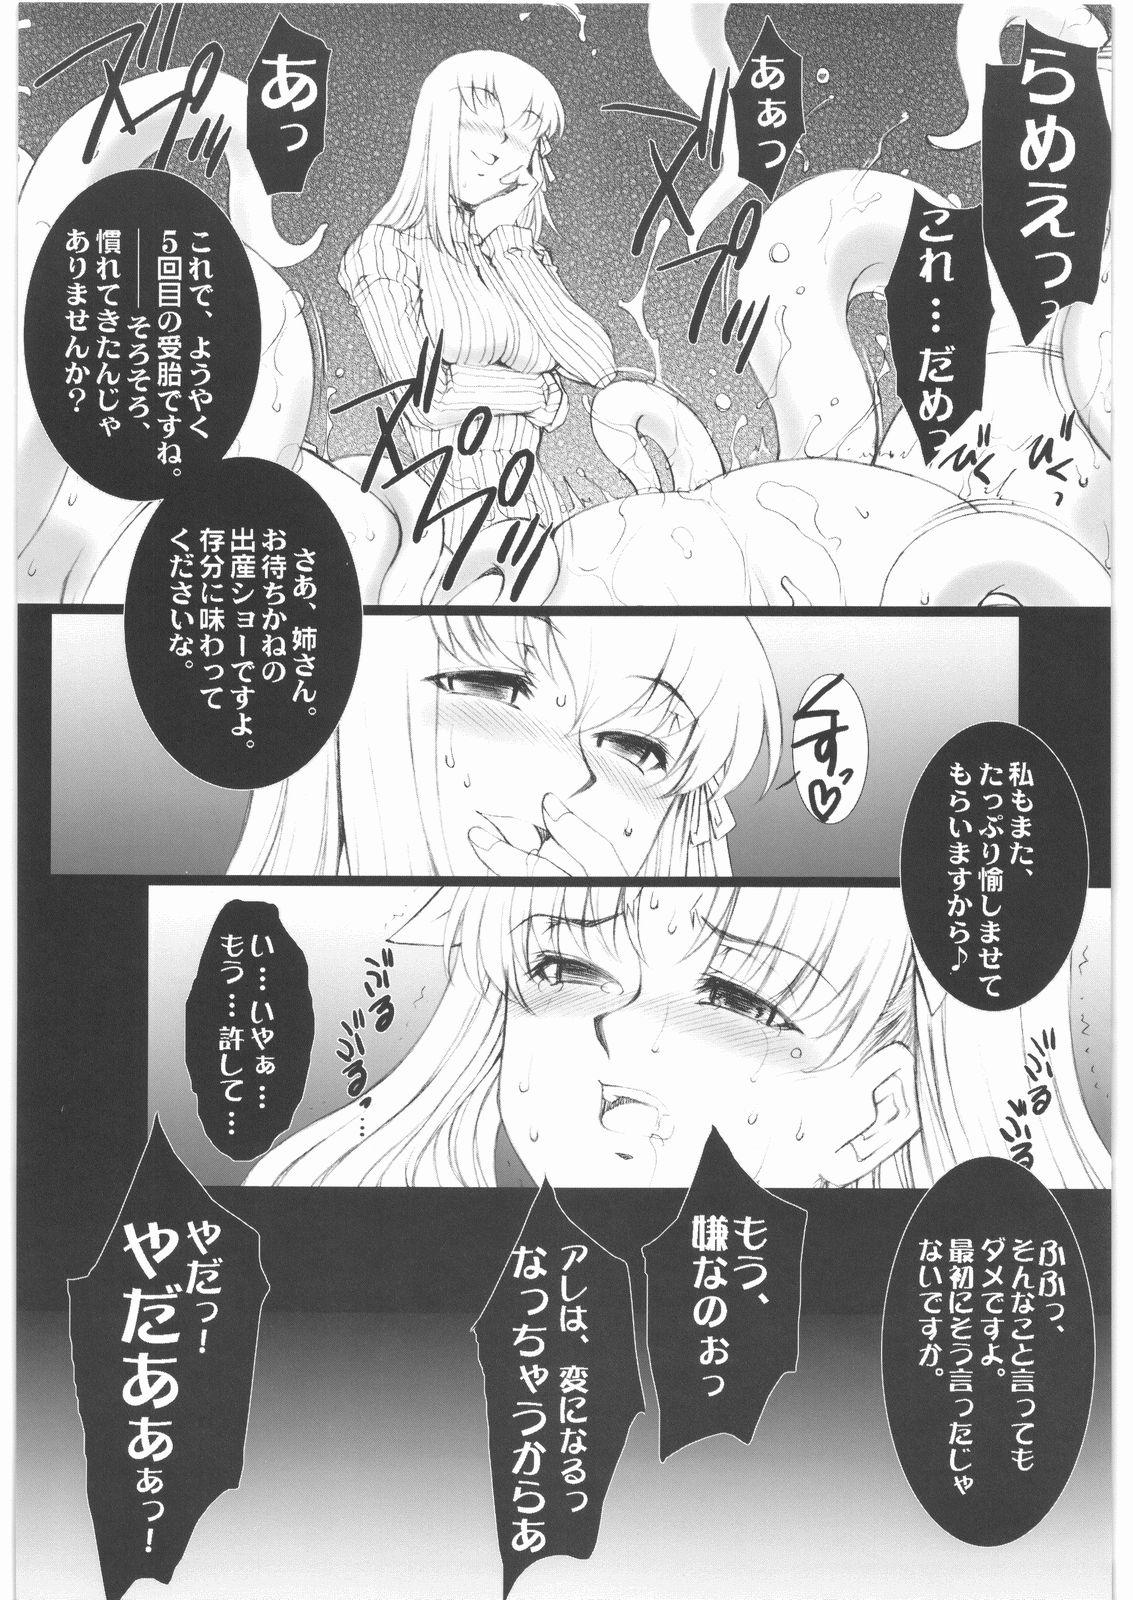 Humiliation Pov Red Degeneration - Fate stay night Sexy - Page 8